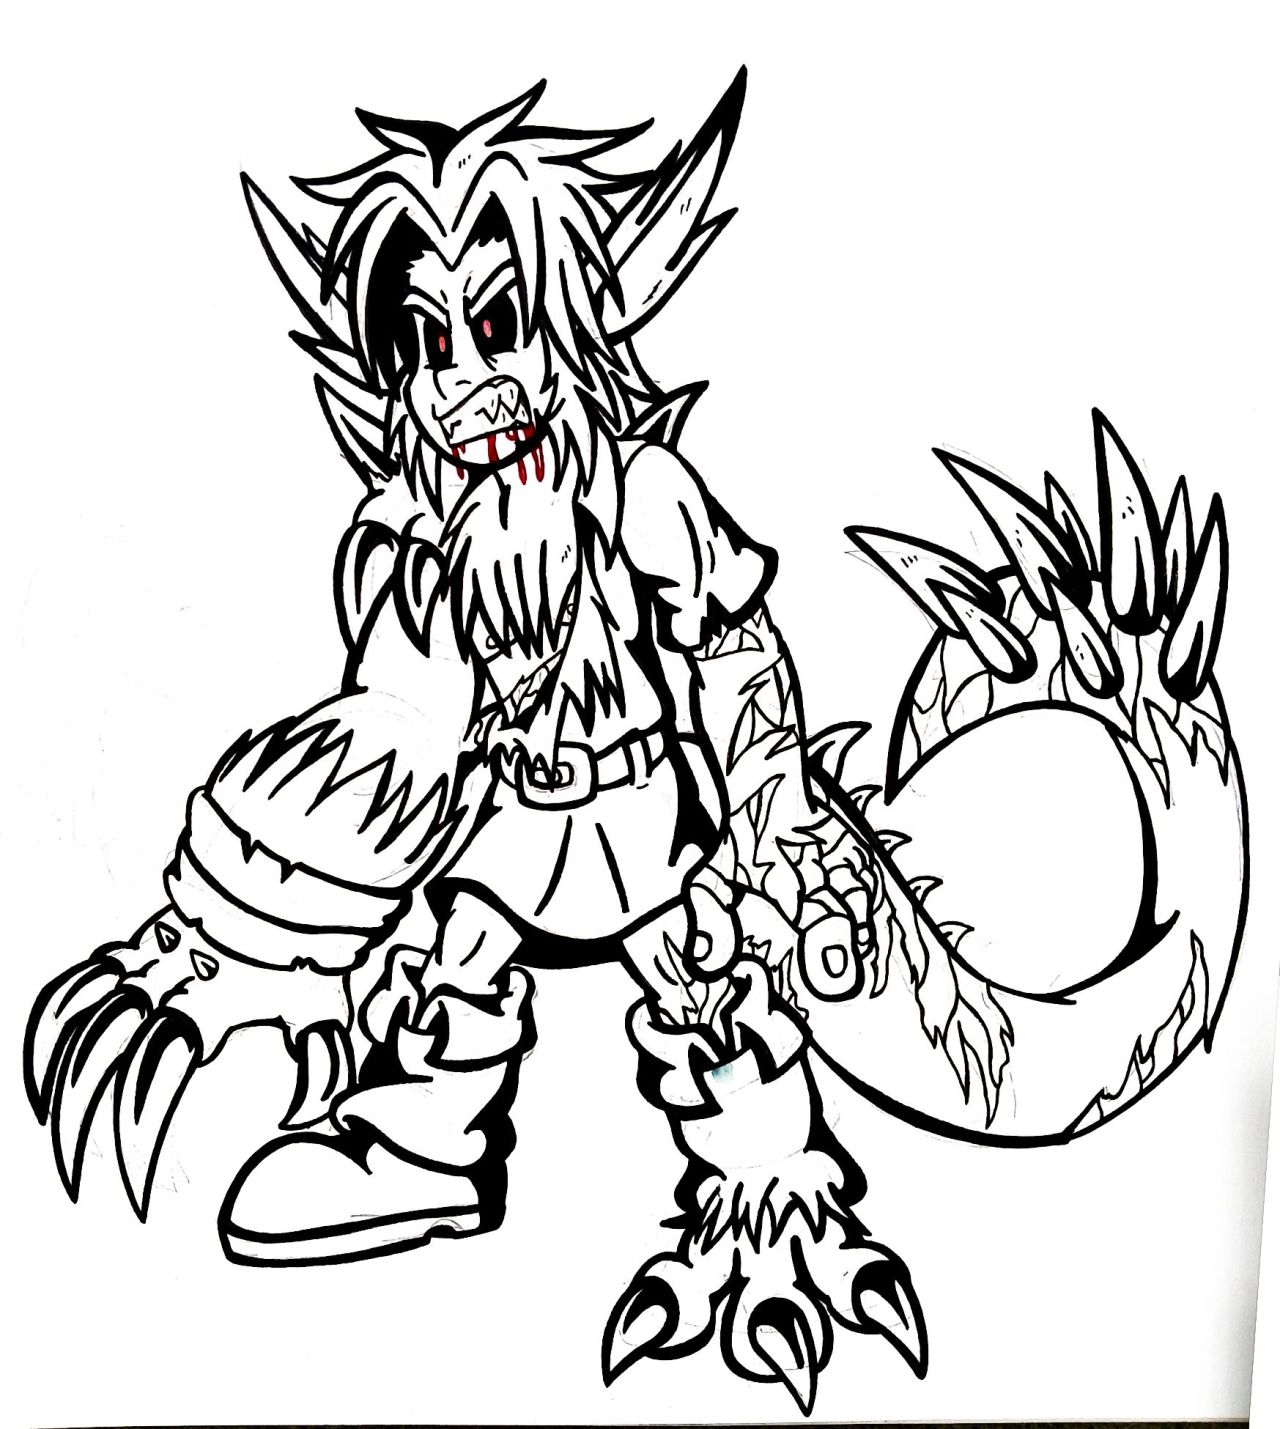 Night of the Werewolves: Young Link by ChibiBrugarou on DeviantArt